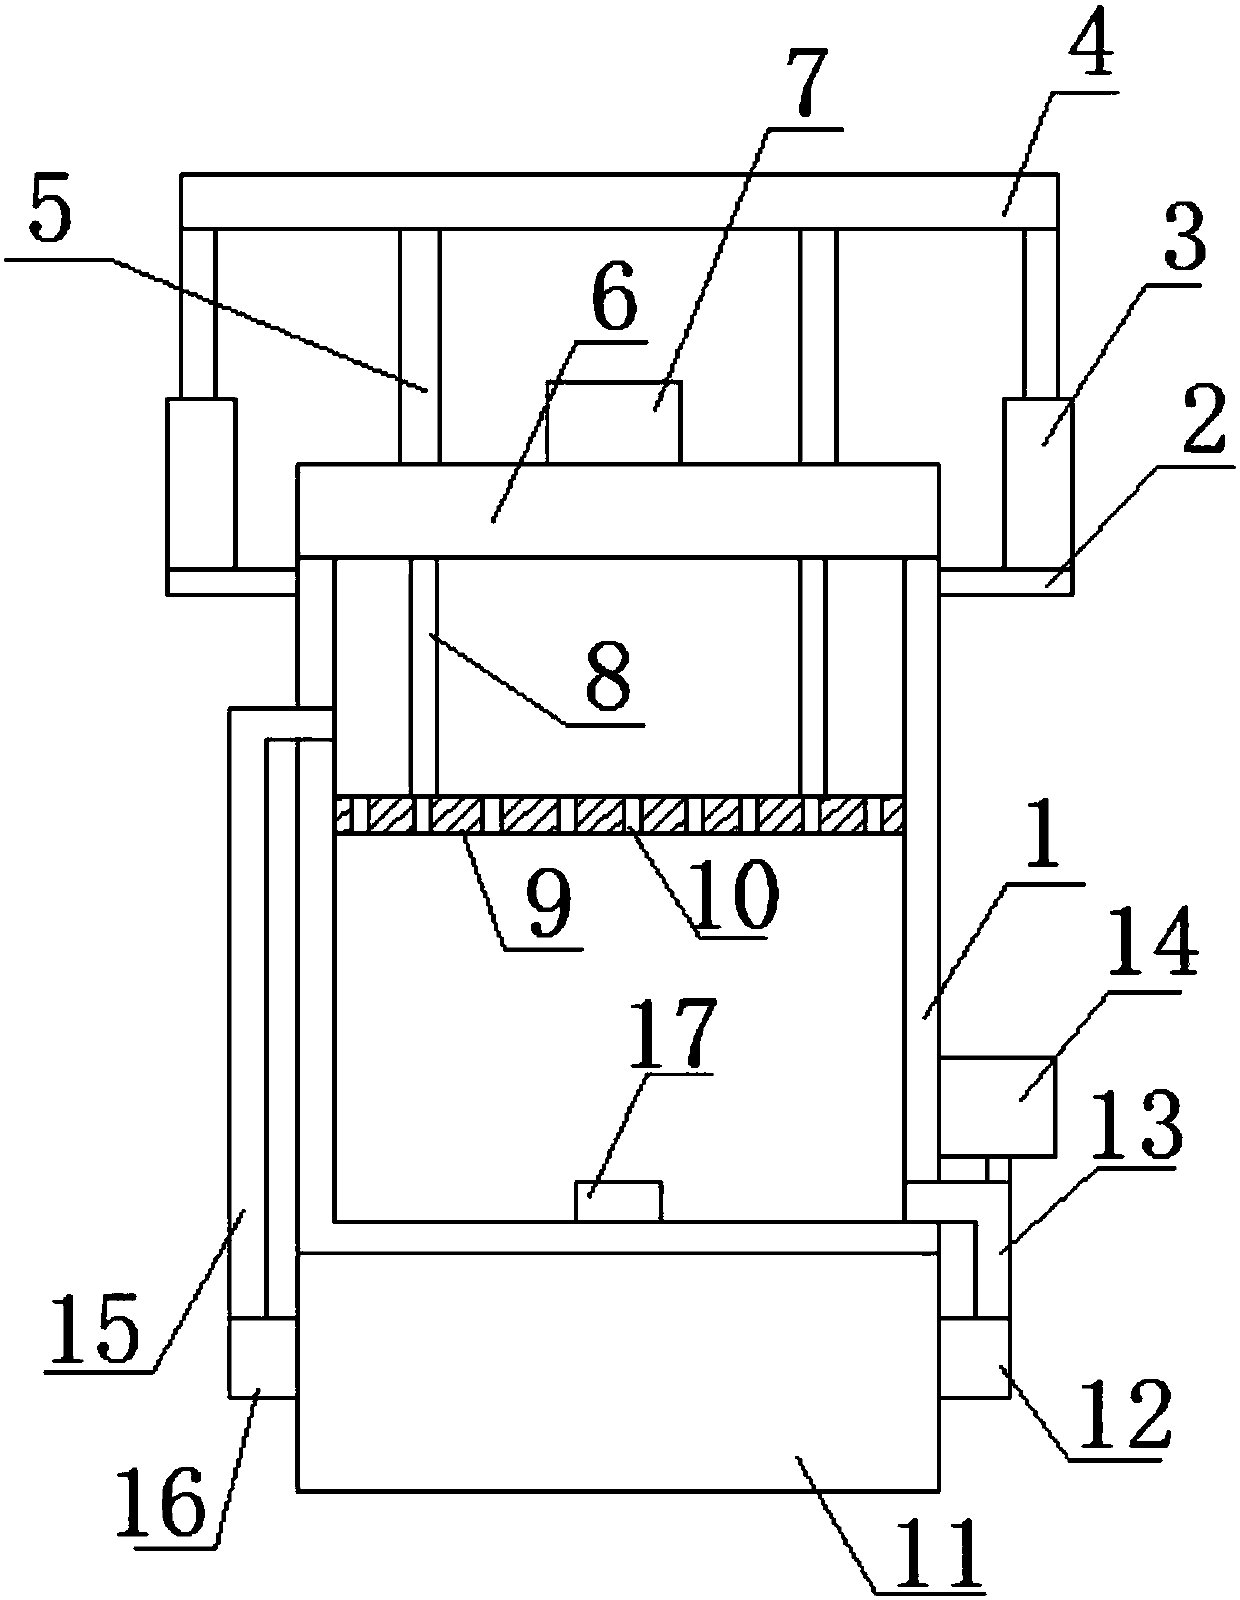 Apparatus of detecting sealing of packaged food